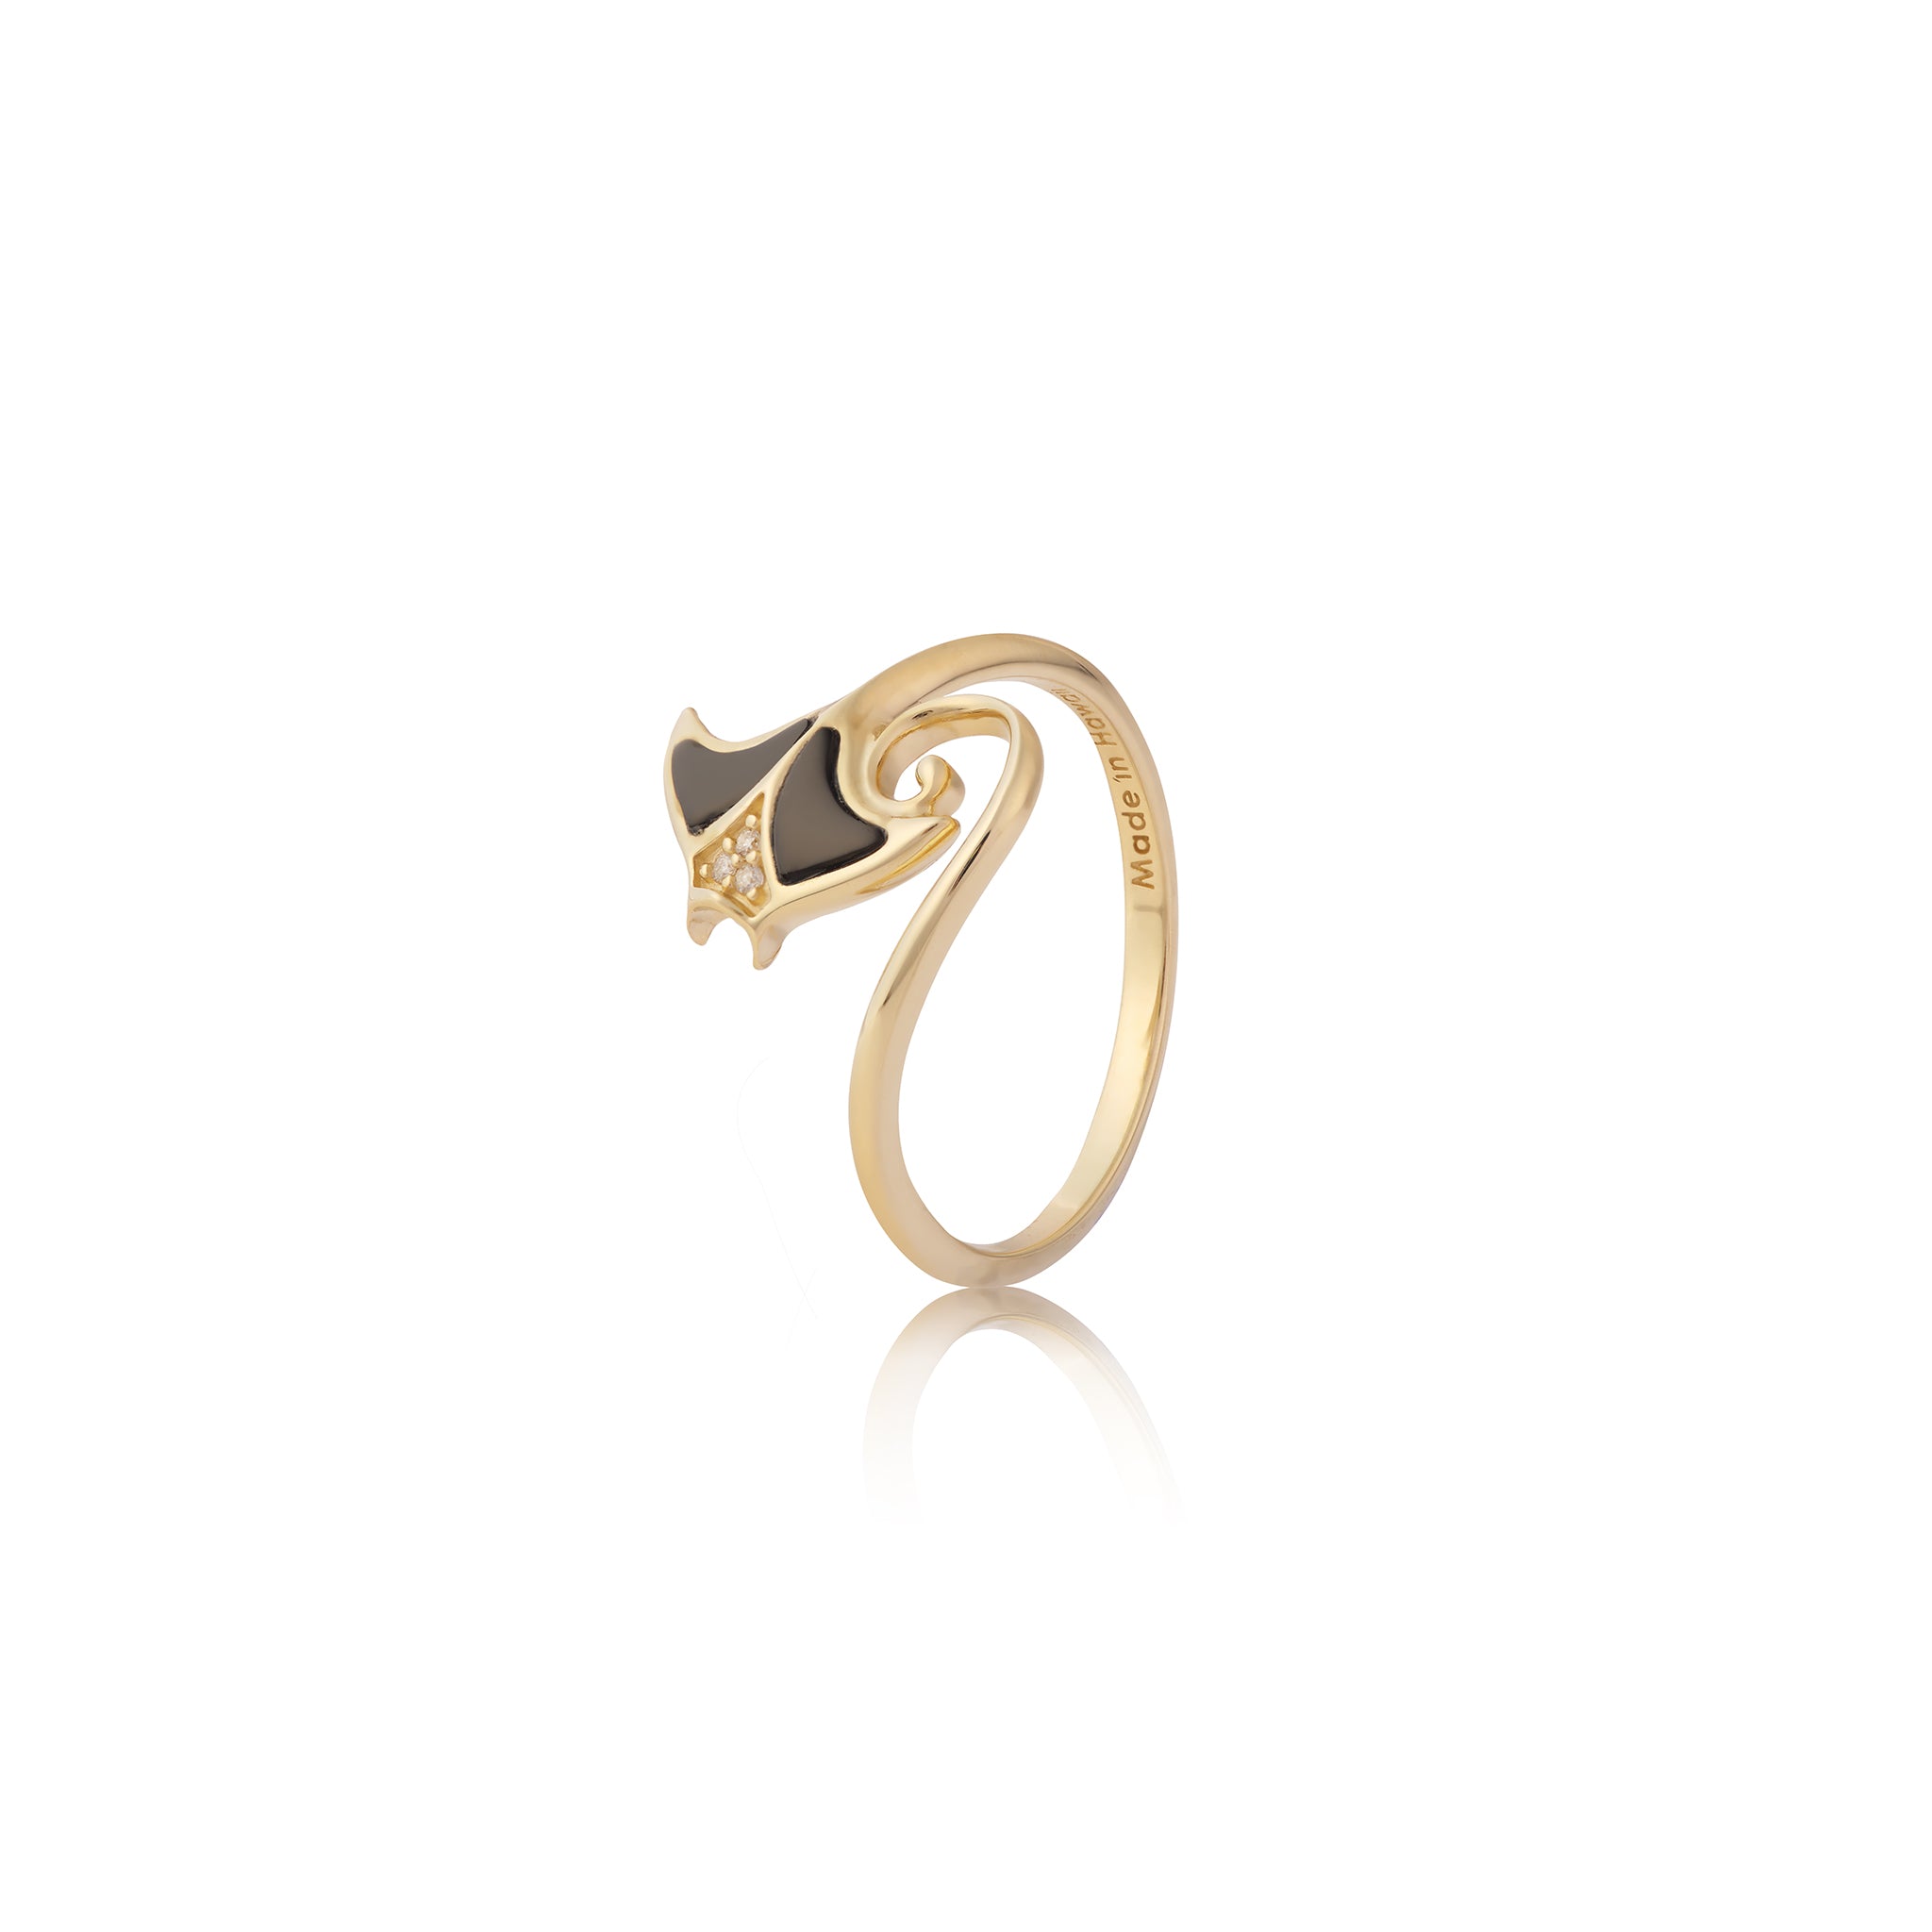 Sealife Manta Ray Black Coral Ring in Gold with Diamonds - 12mm